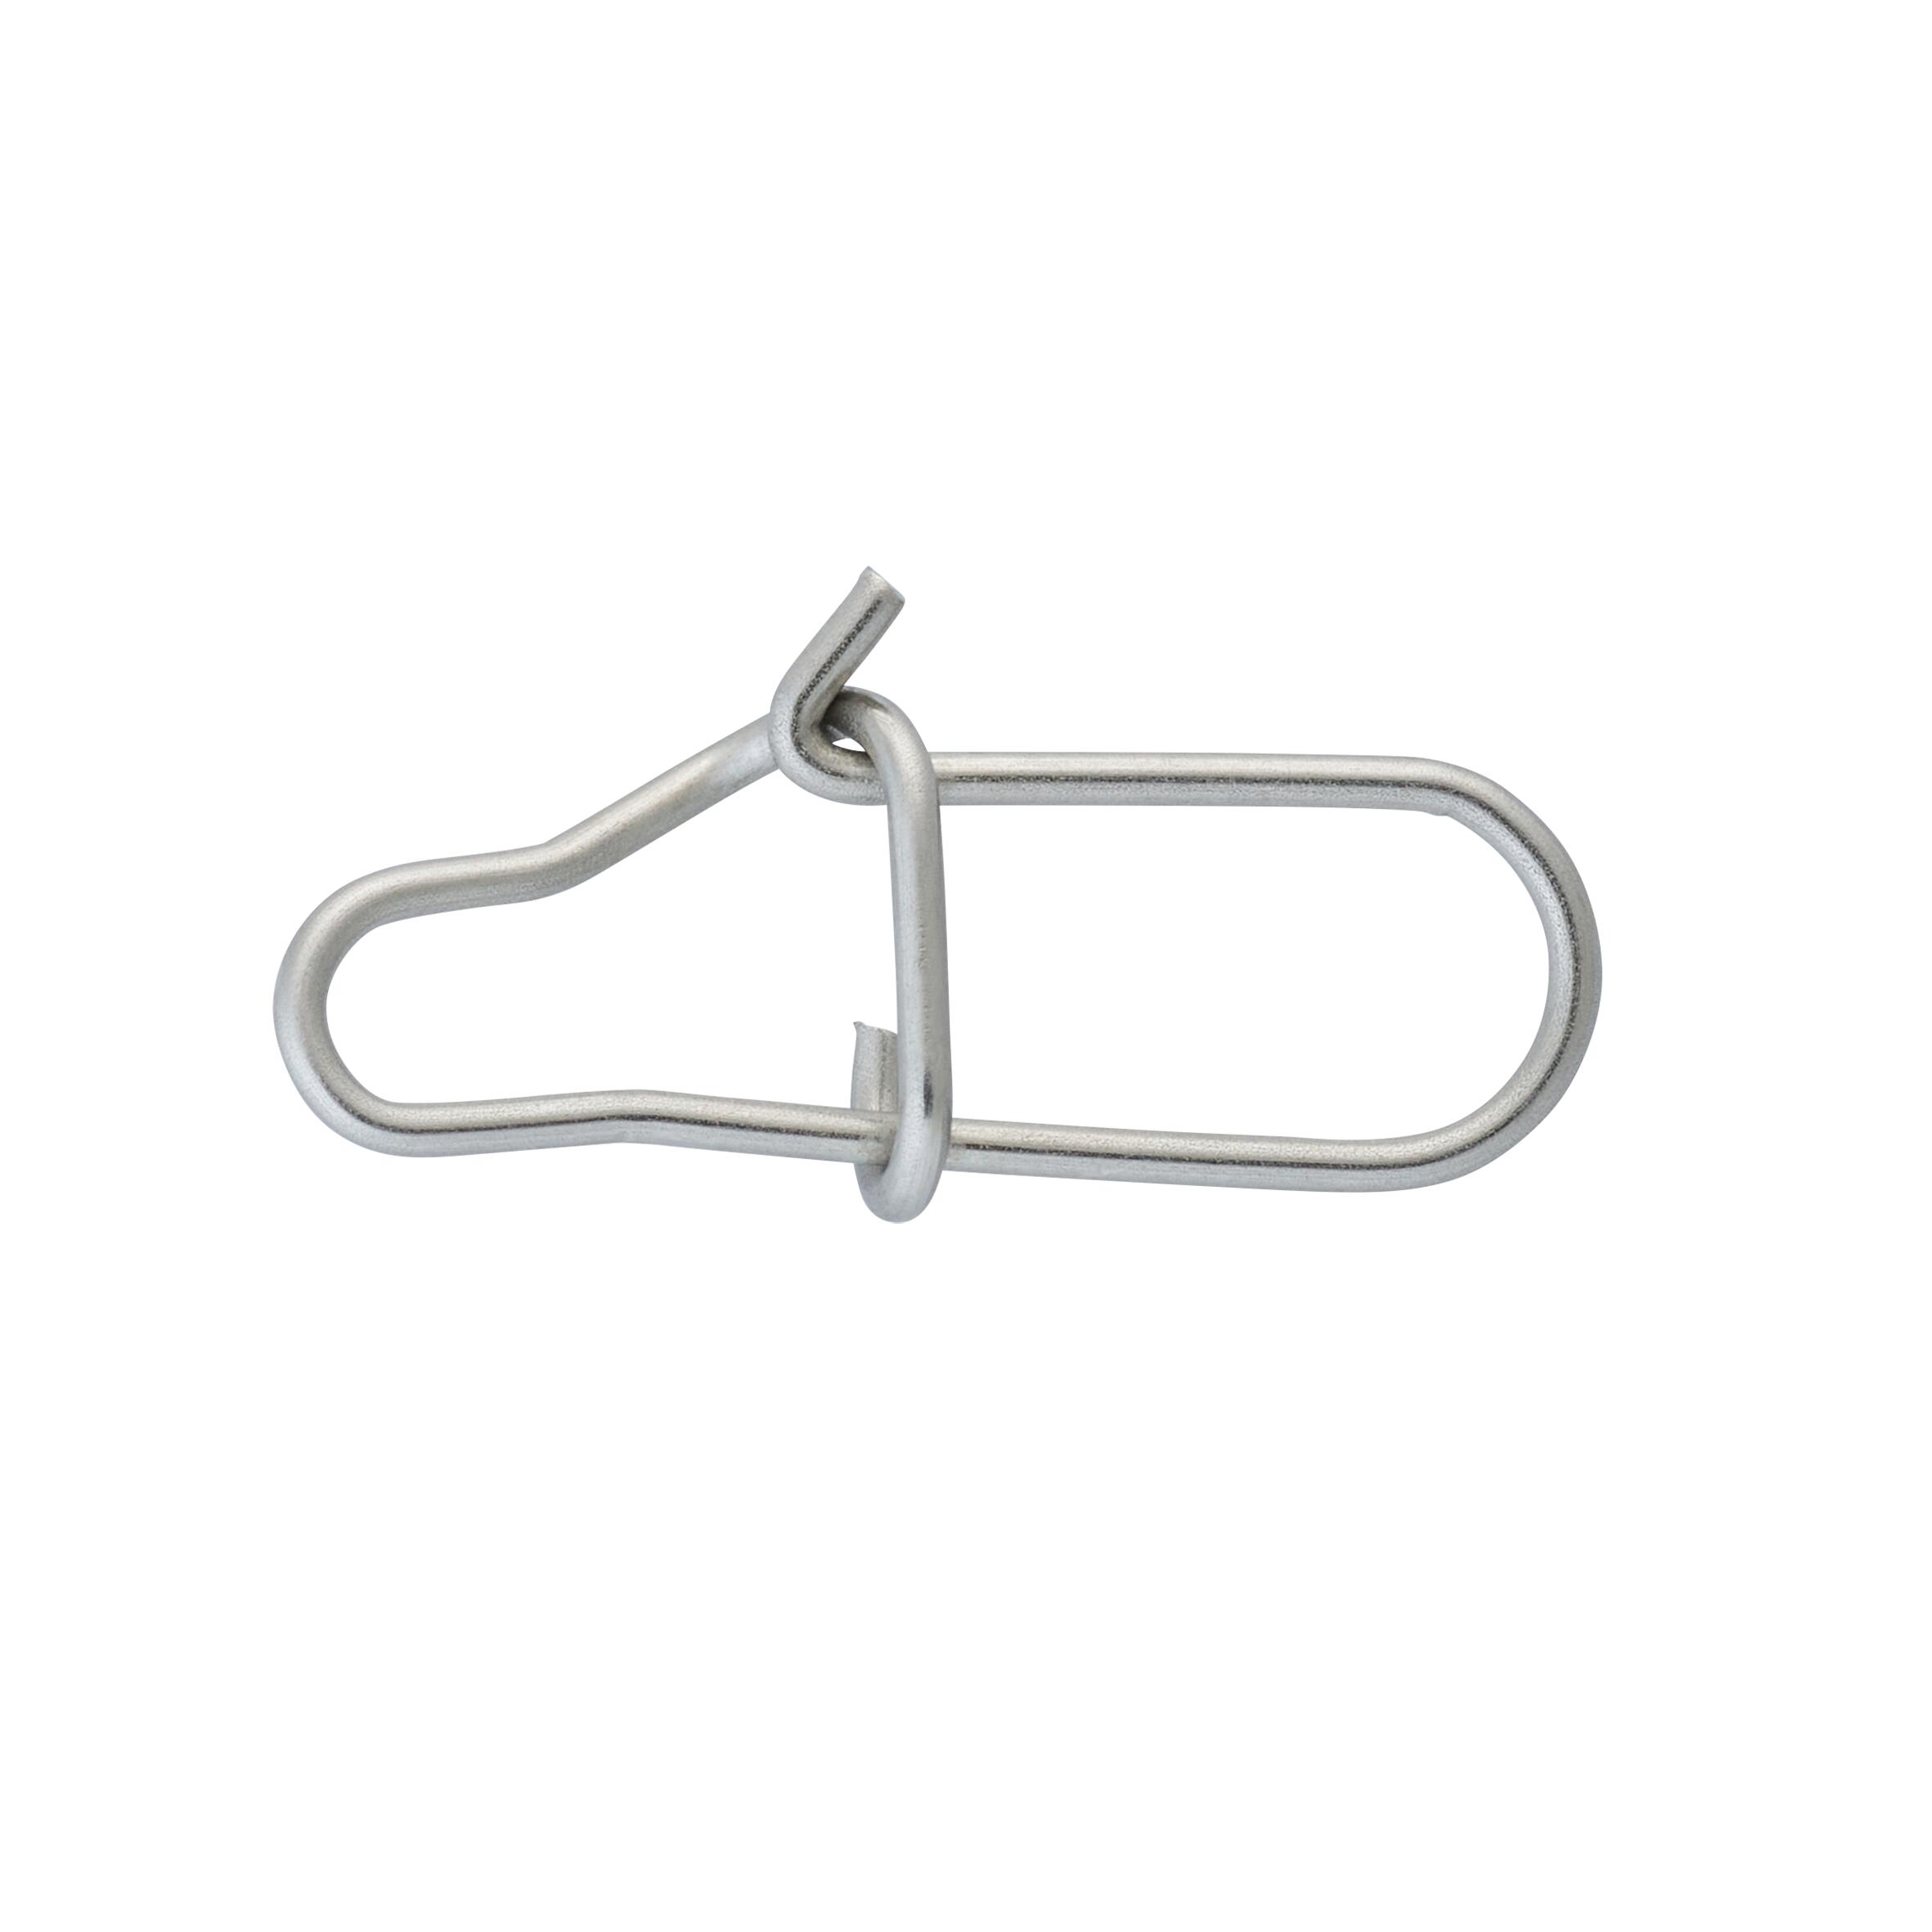 Fishing Stainless Steel Double Snap Clips x10 10/10